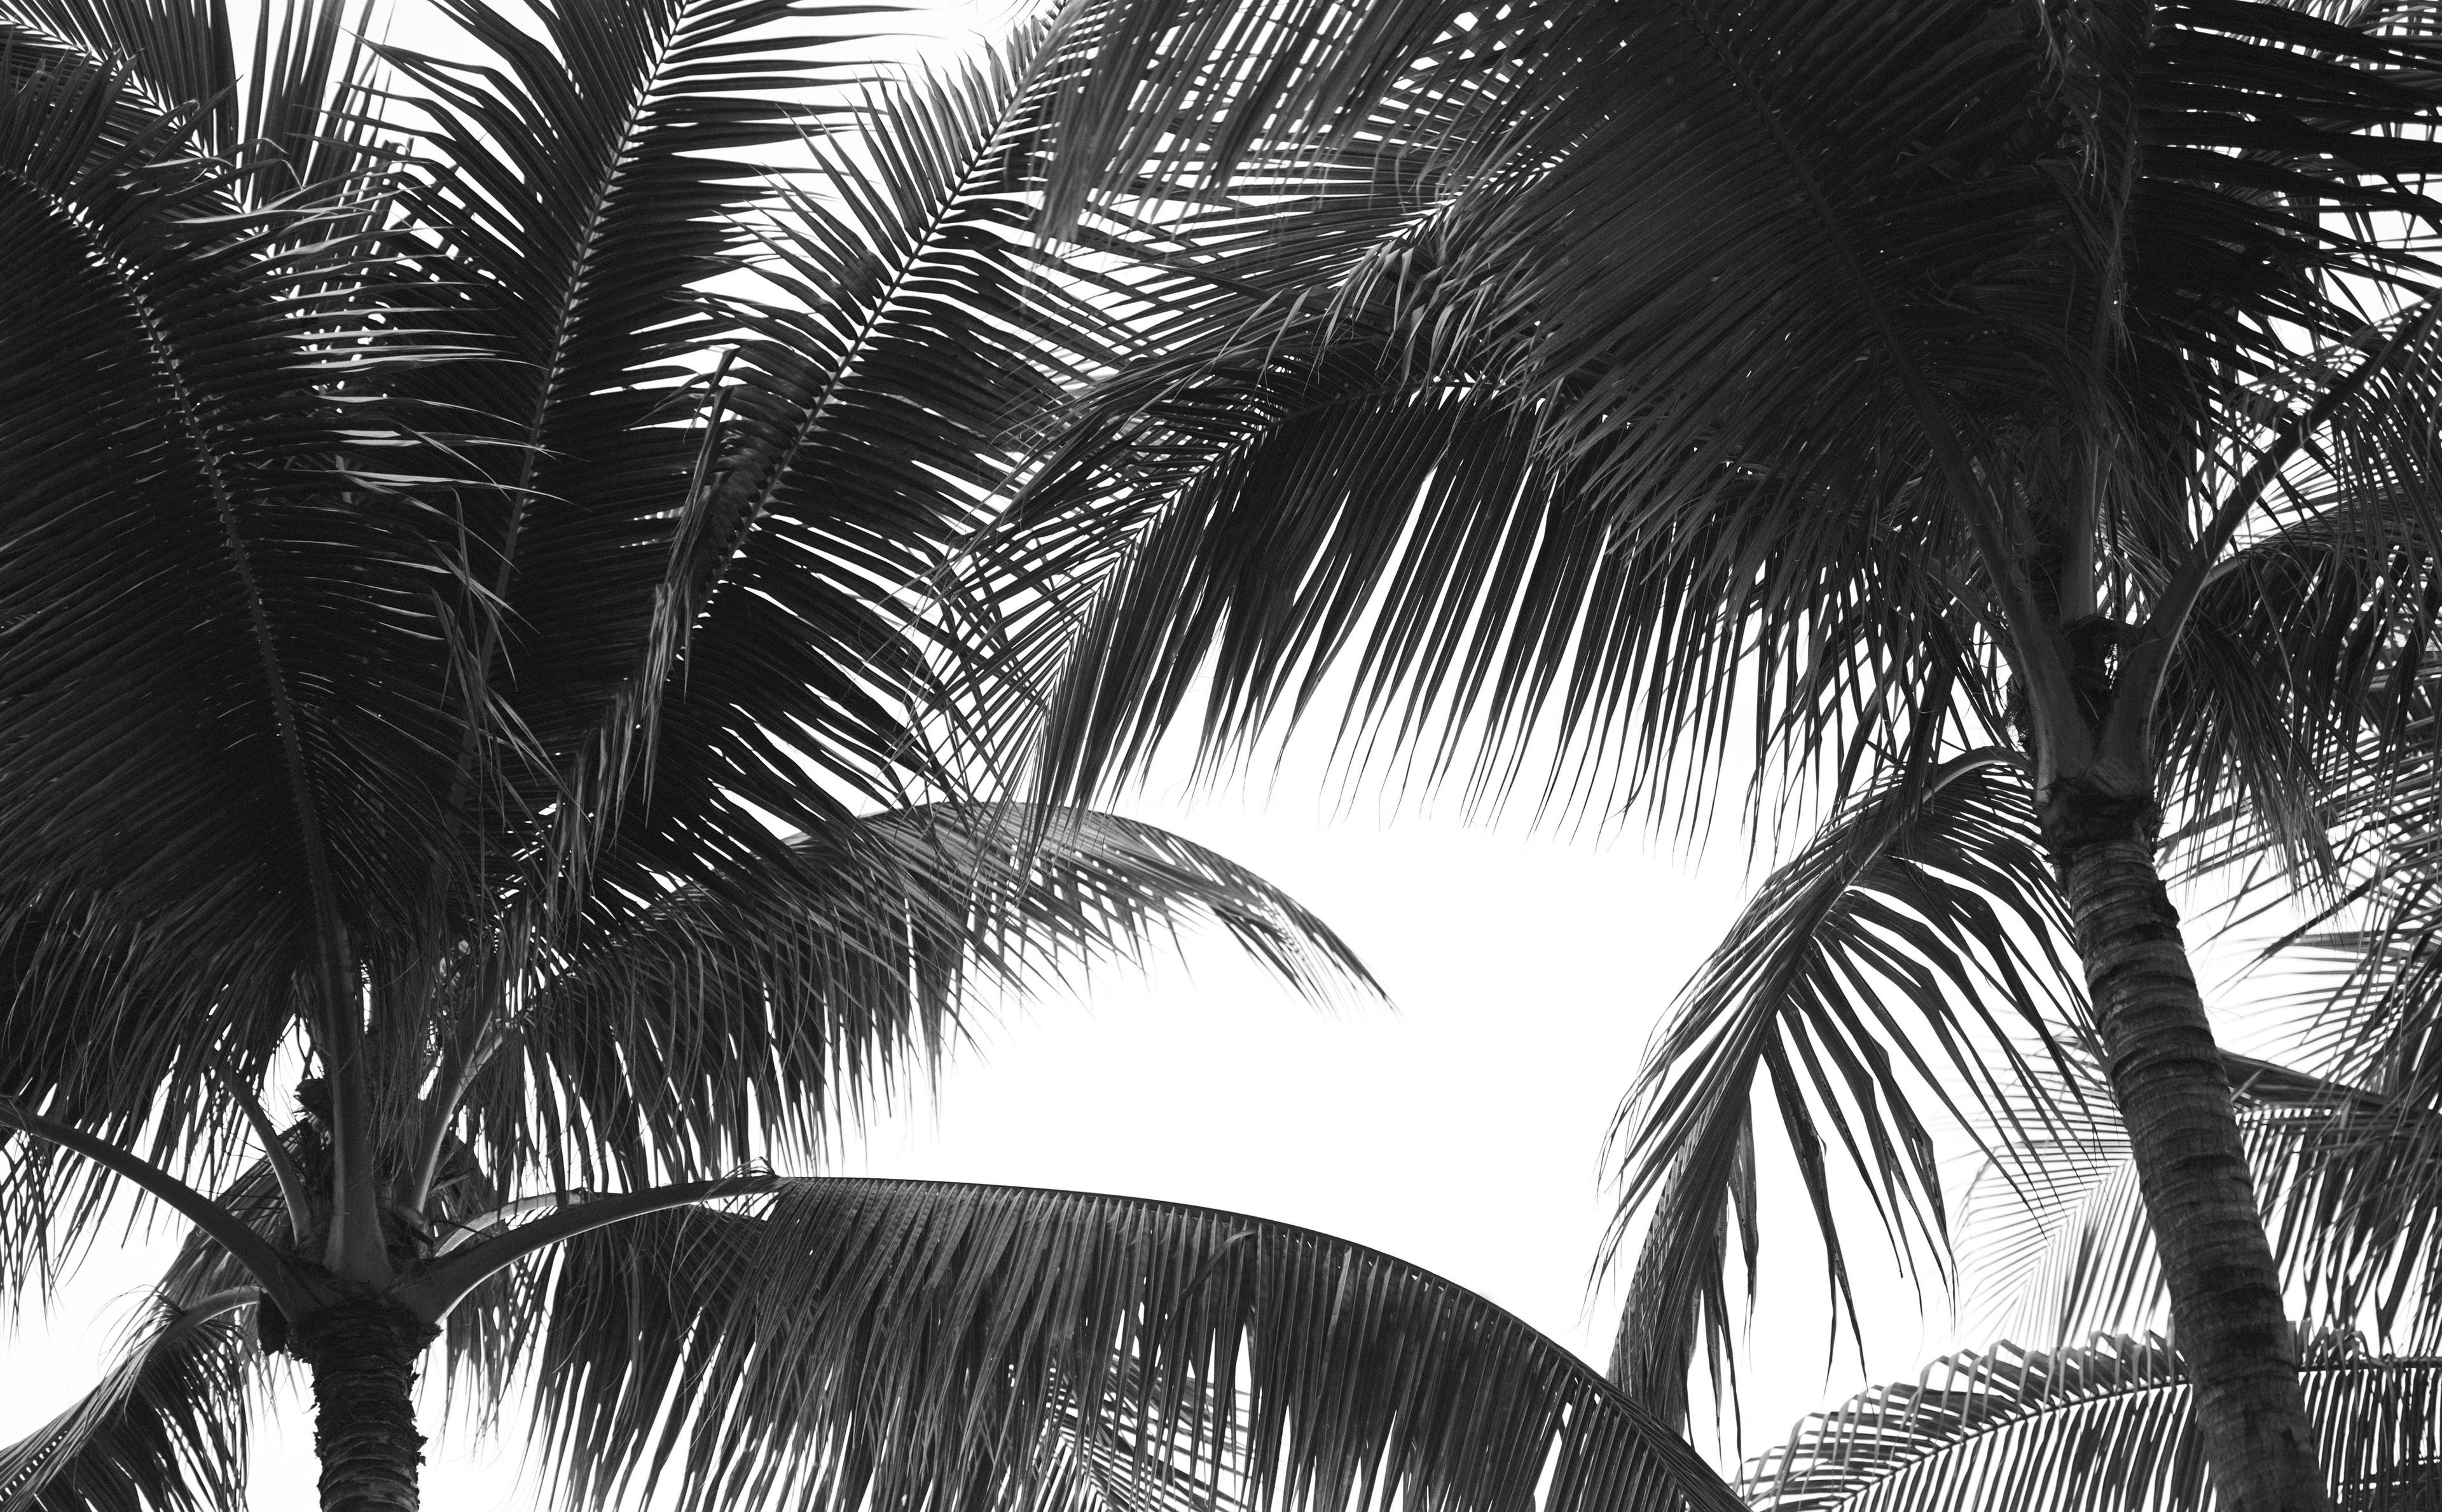 Black and white photo of palm trees.